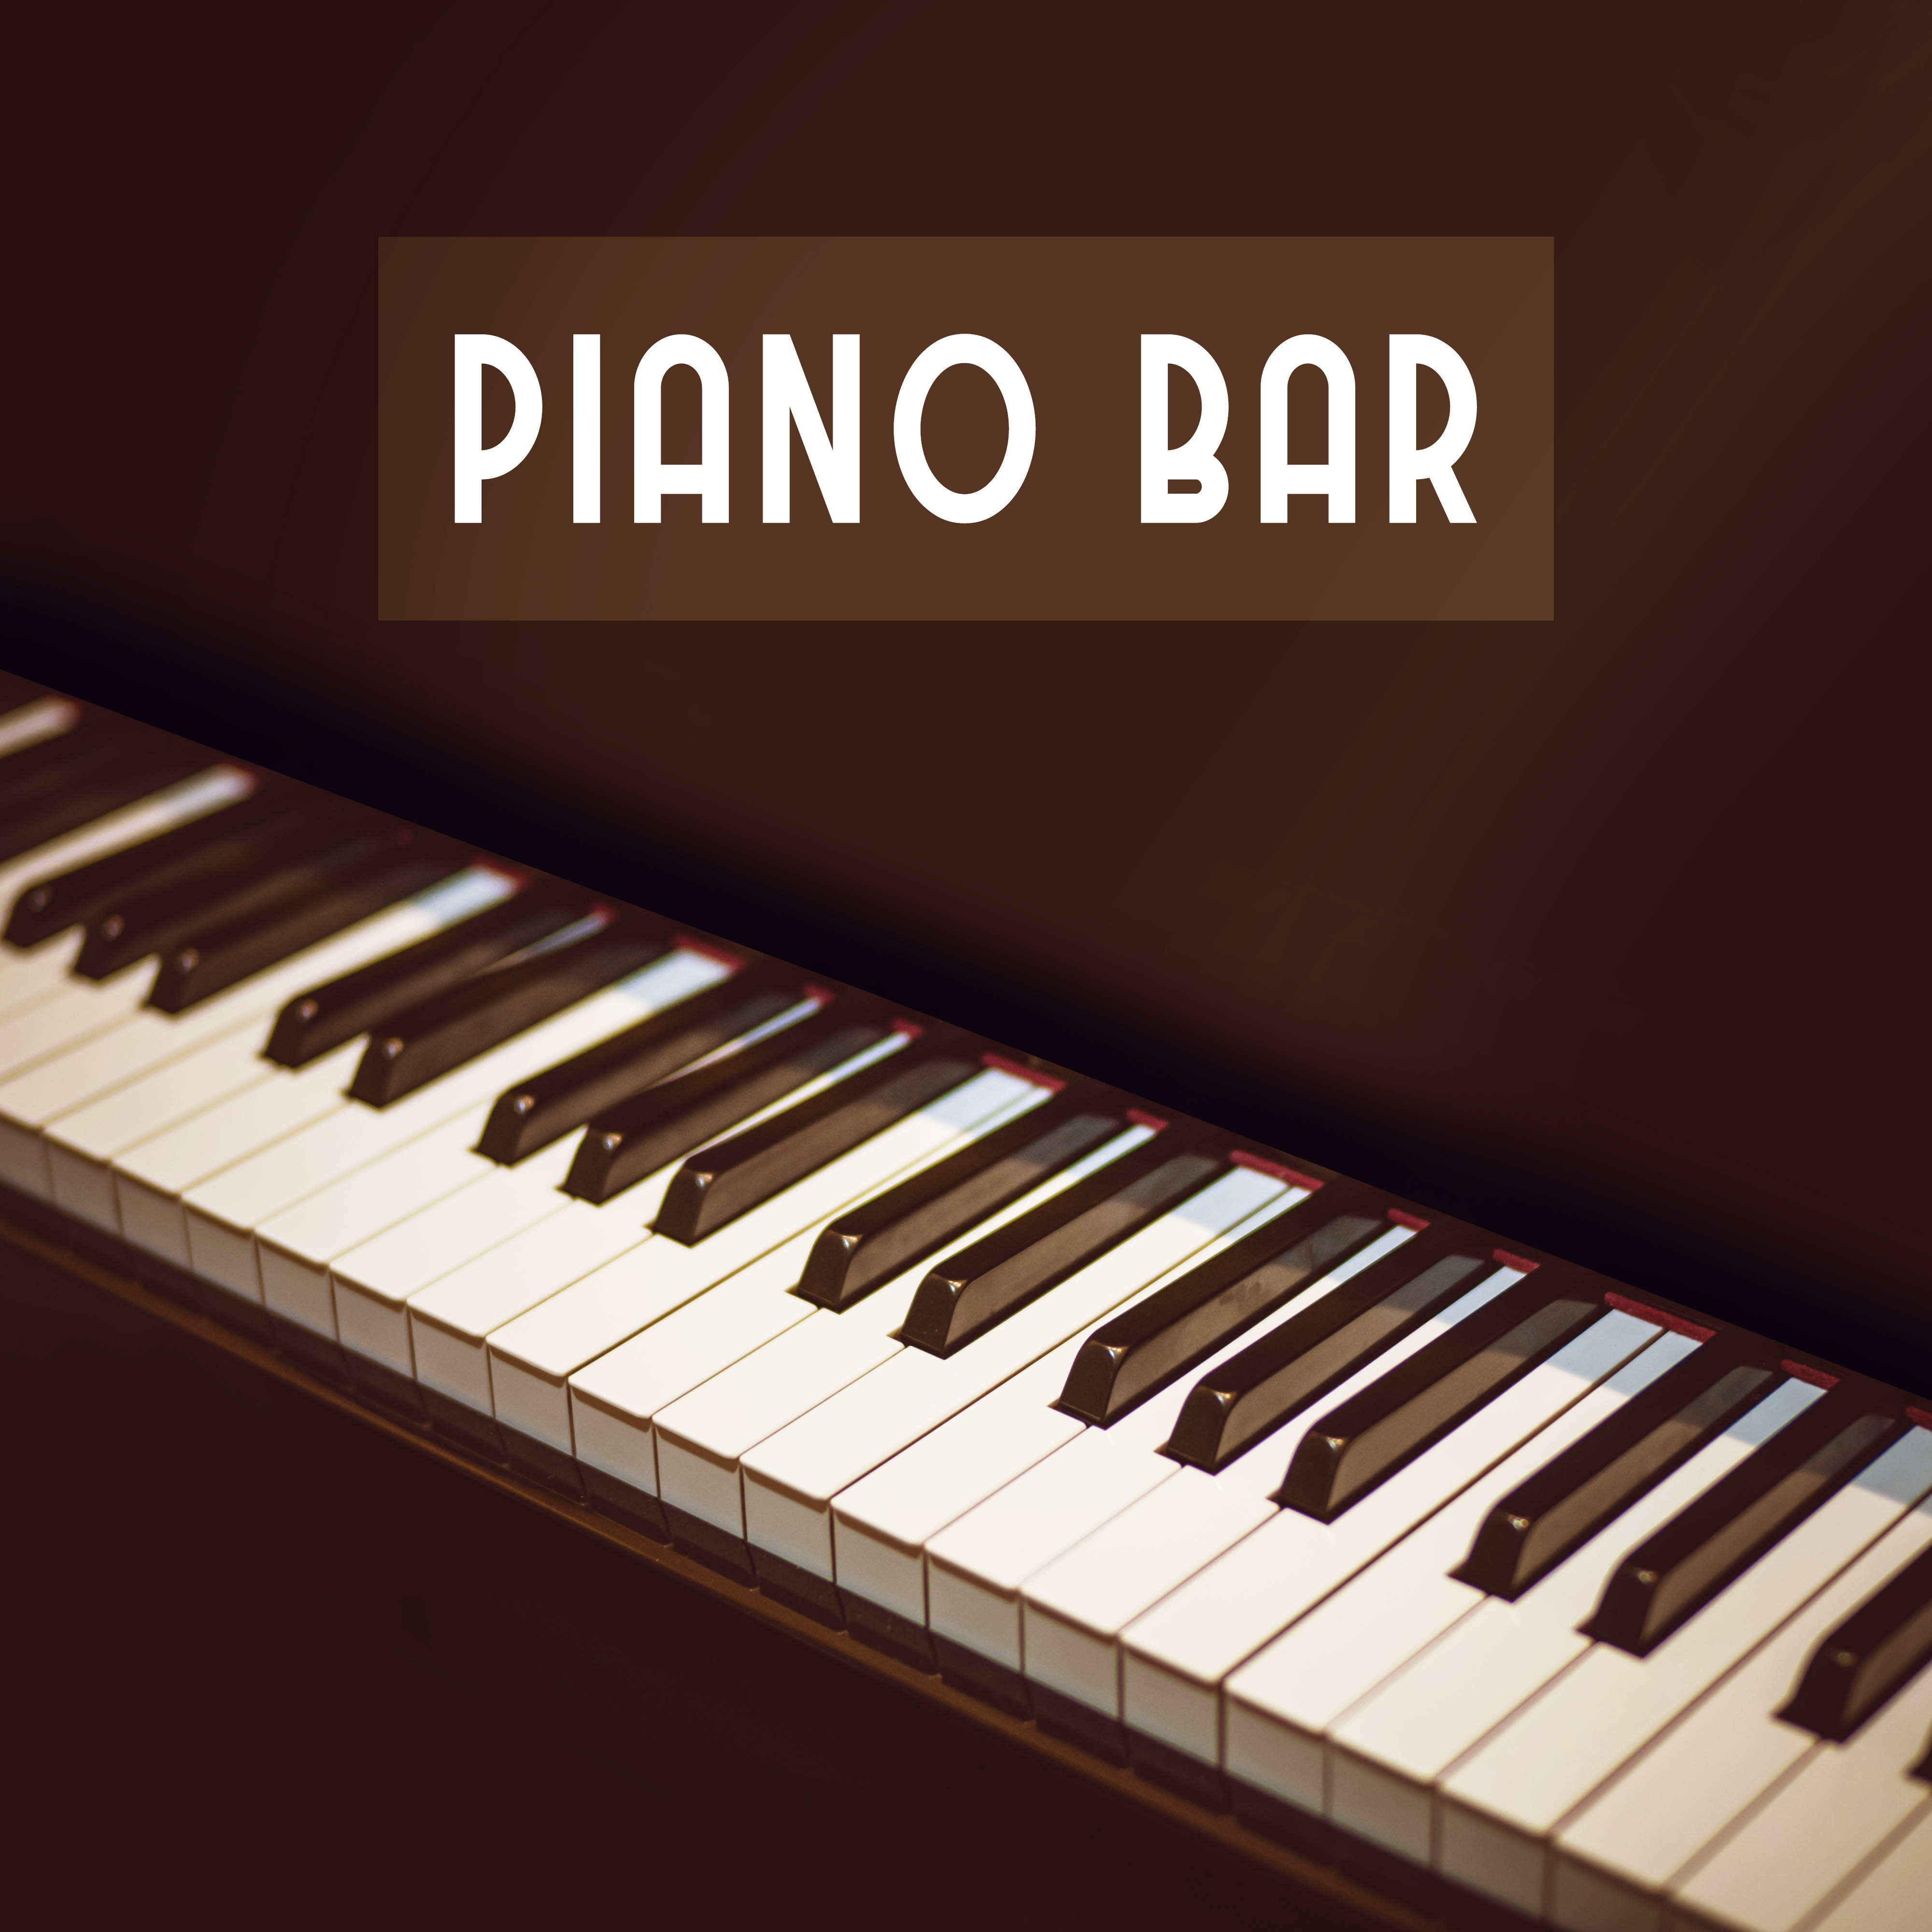 Piano Bar  Restaurant Jazz, Relax with Family, Instrumental Songs, Perfect Evening